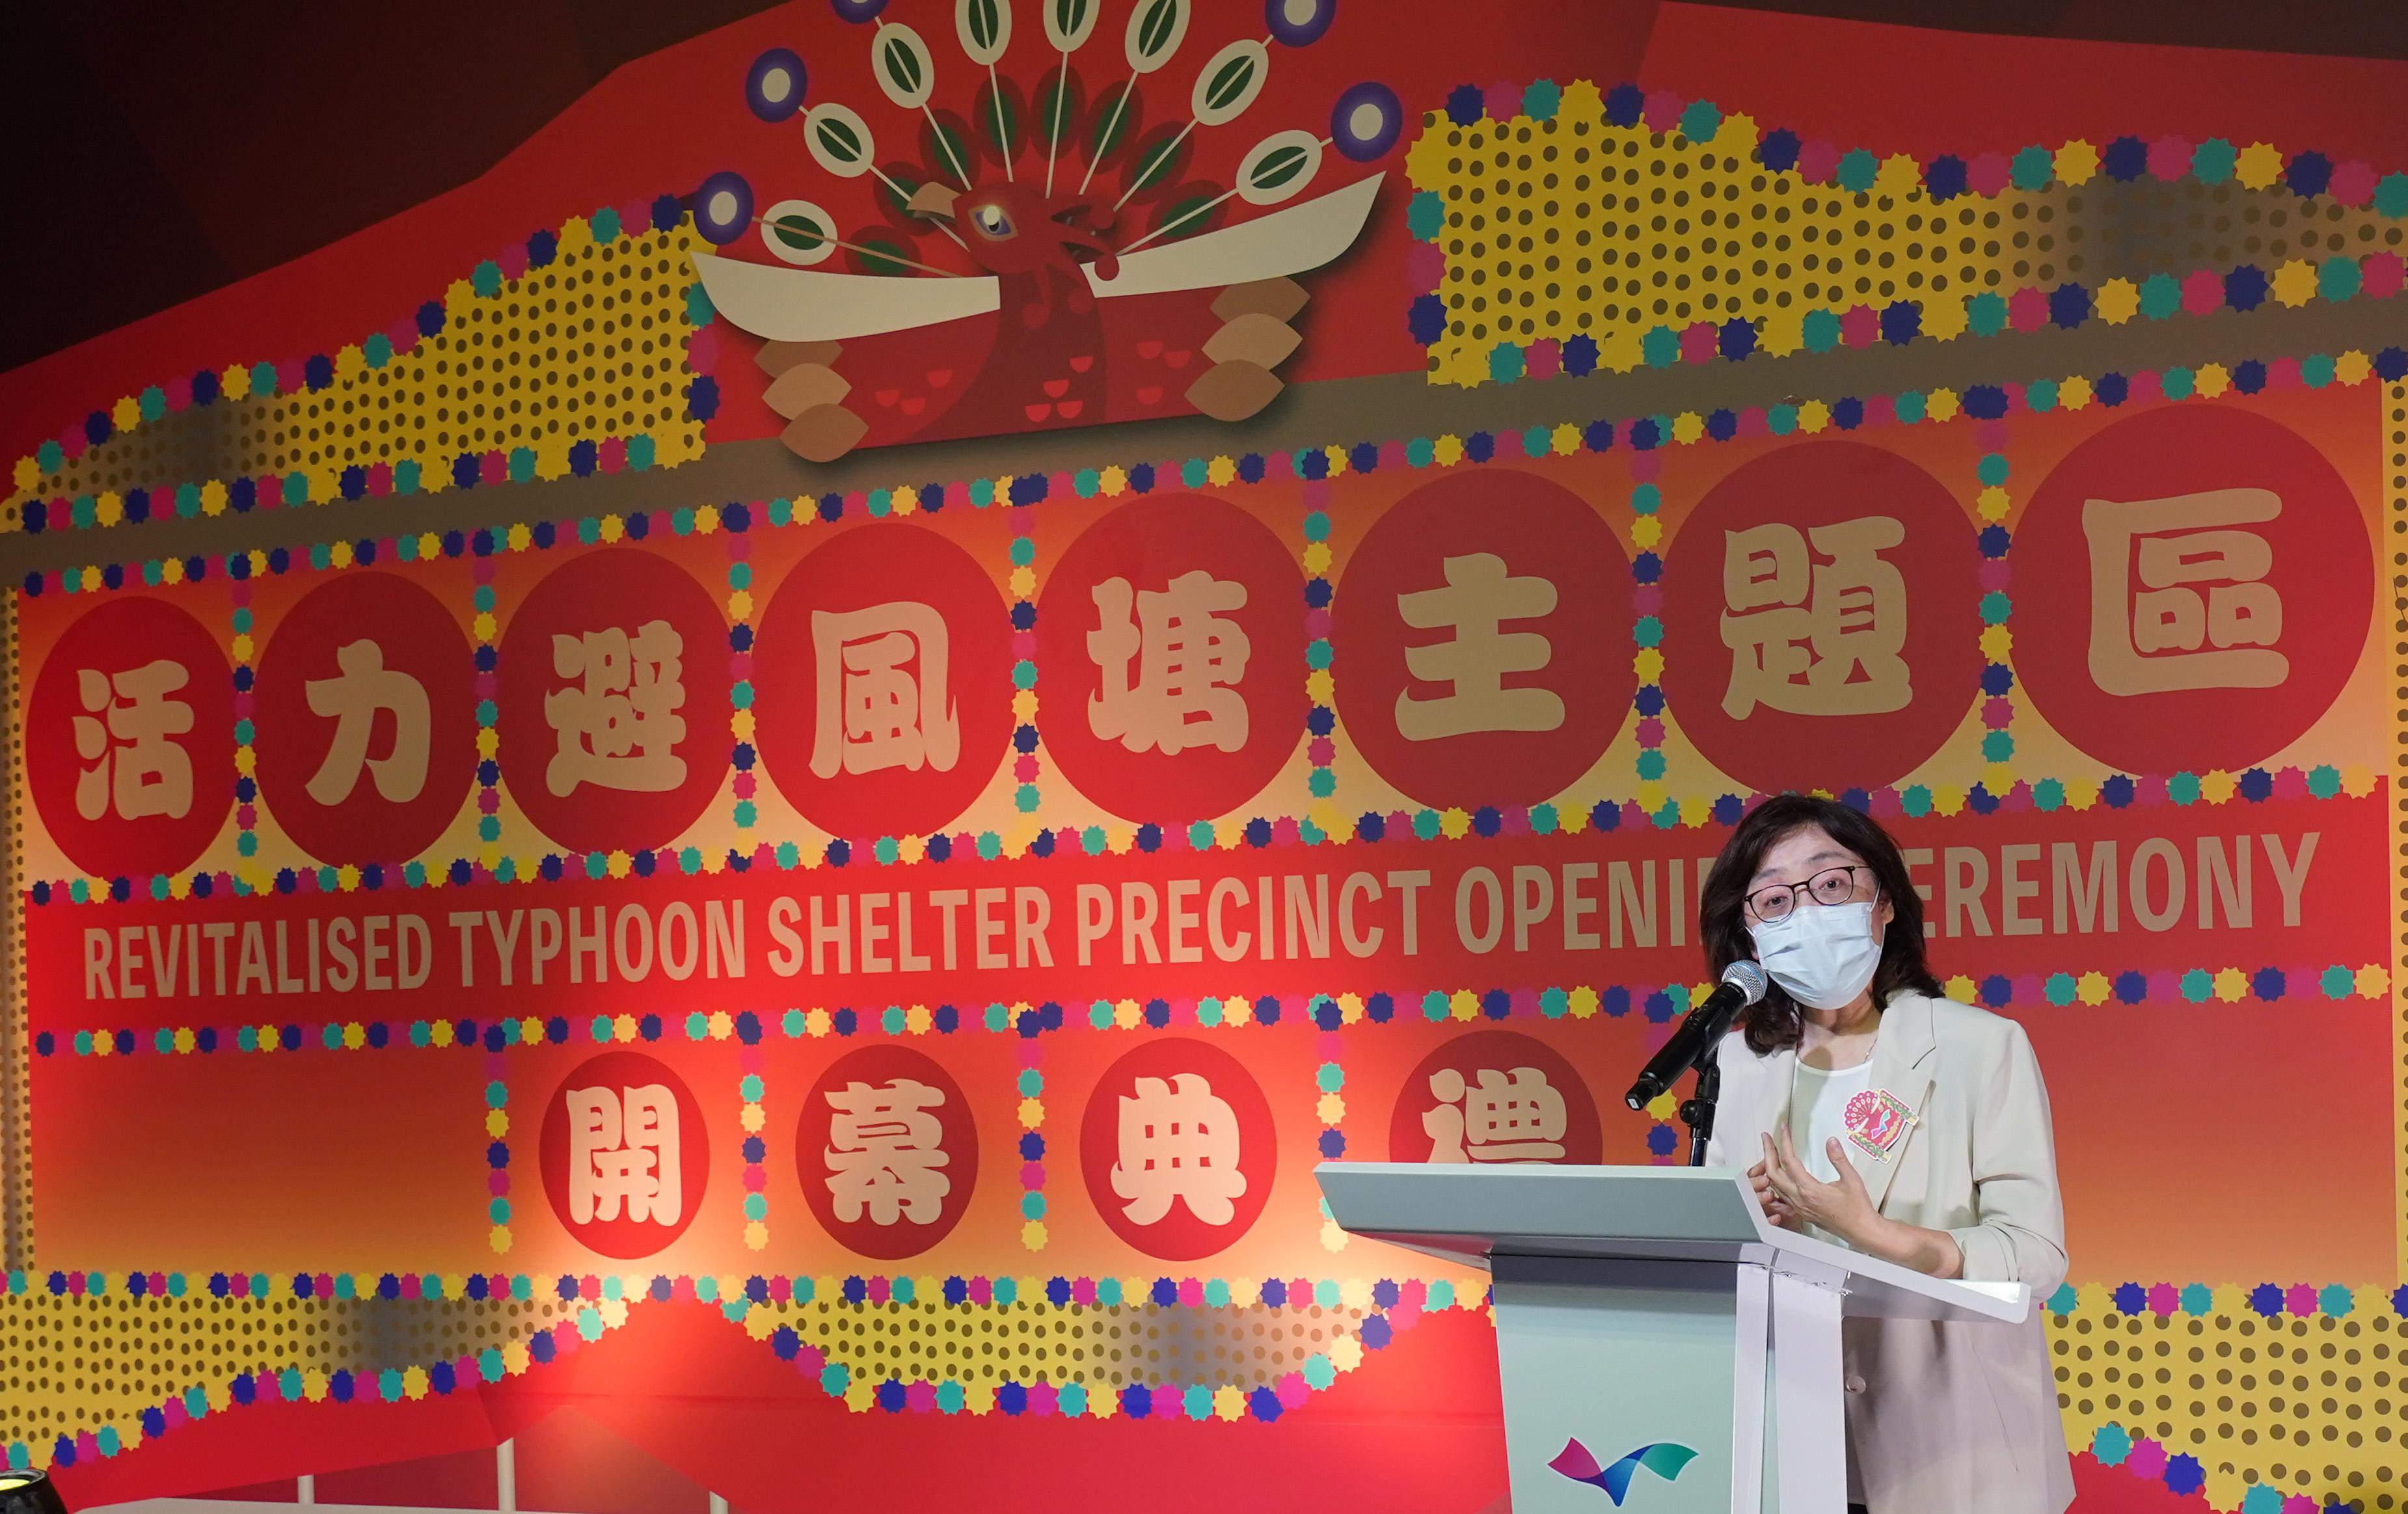 The Revitalised Typhoon Shelter Precinct (the Precinct) will be officially opened next Friday (September 9). Photo shows the Secretary for Development, Ms Bernadette Linn, speaking at the opening ceremony of the Precinct today (September 2).